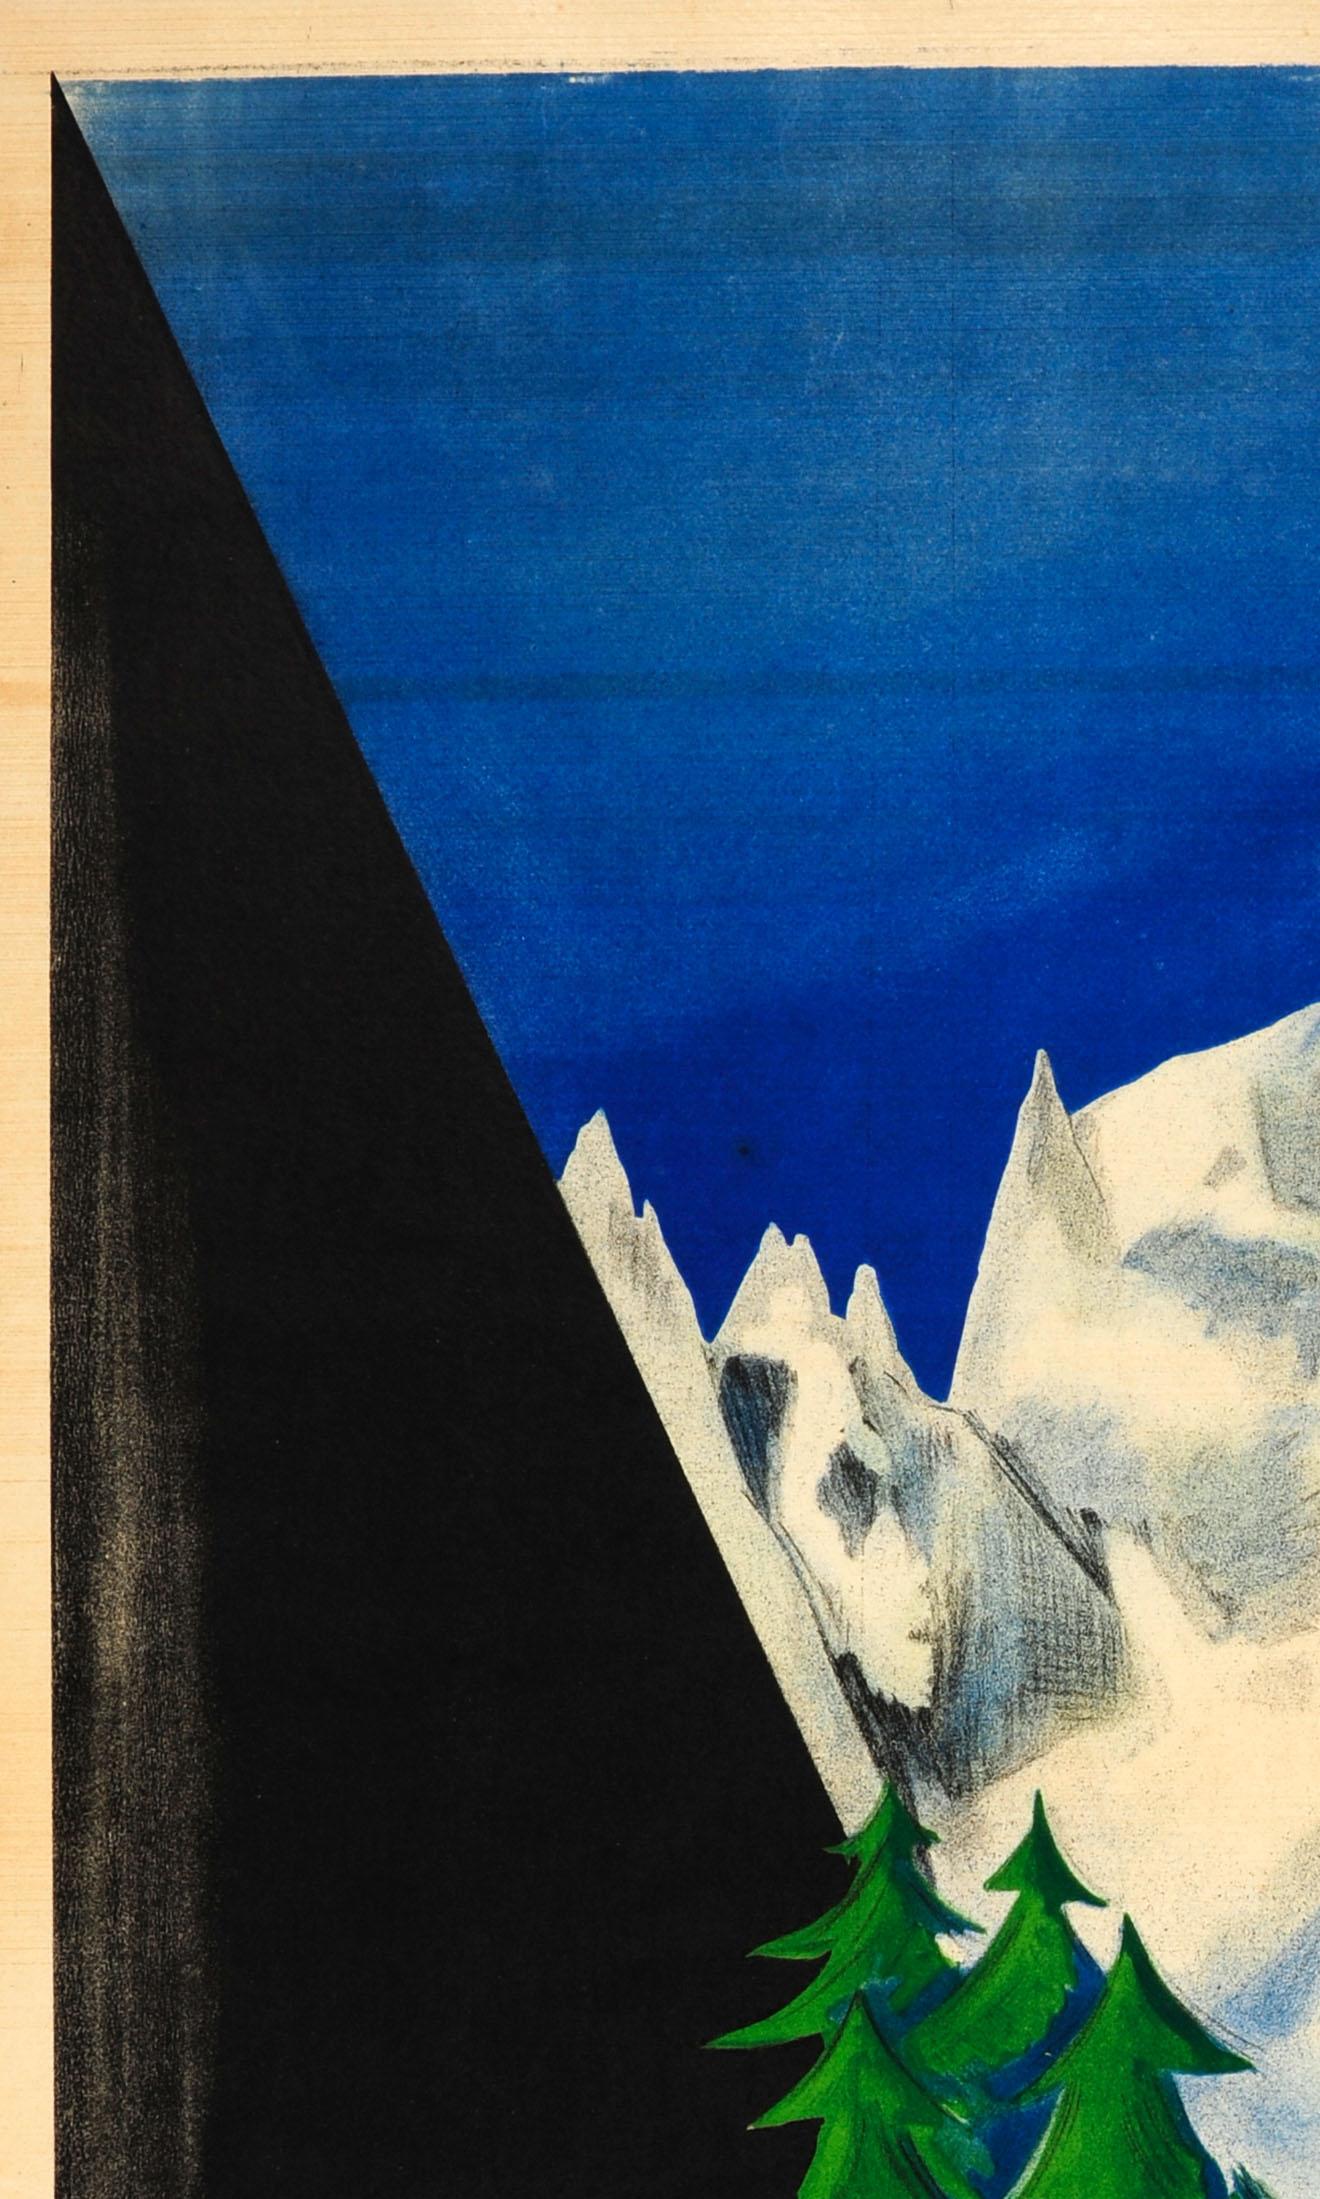 Original vintage travel advertising poster for La Vallee d'Aoste (Italie) / The Aosta Valley (Italy). Great image of the valley with pine trees in the foreground and mountain peaks covered in snow in the background under a deep blue sky. Artwork by